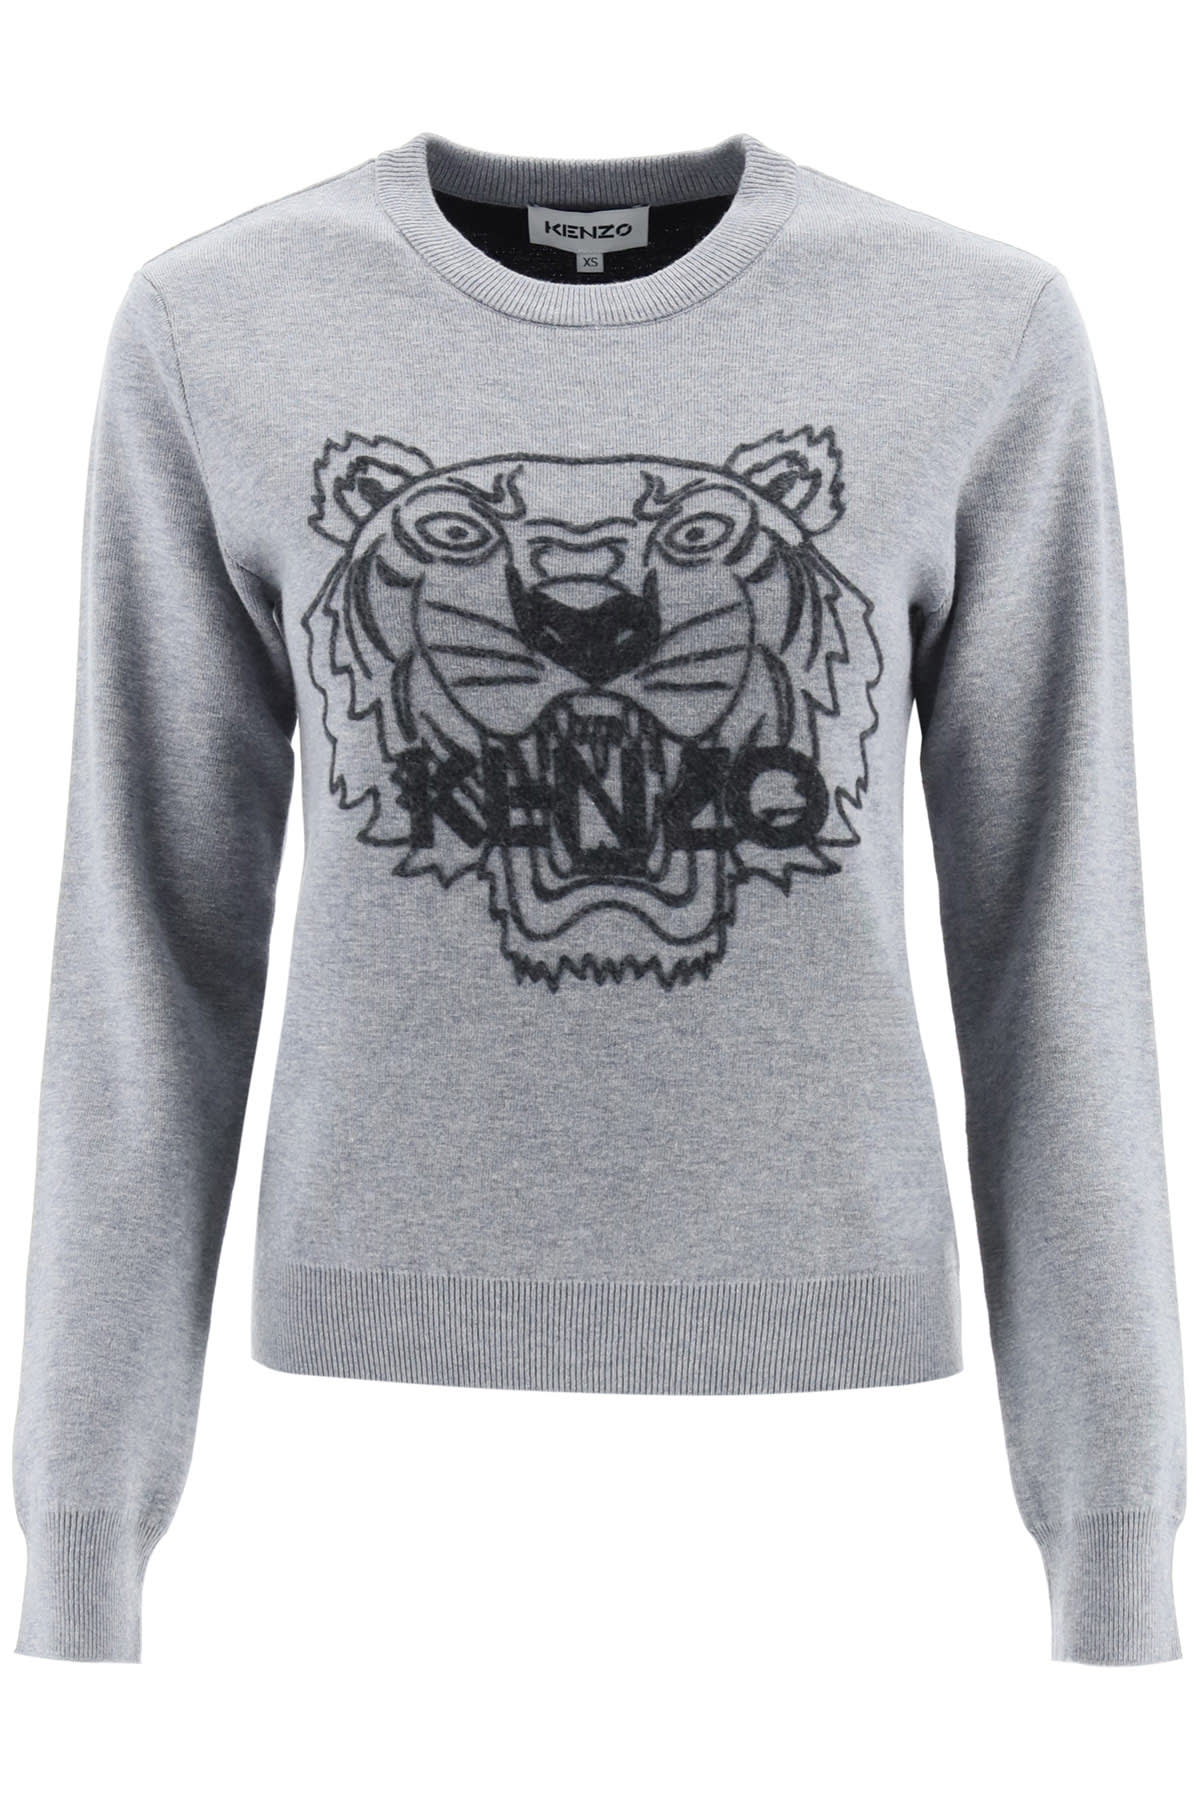 Kenzo Sweater With Tiger Embroidery